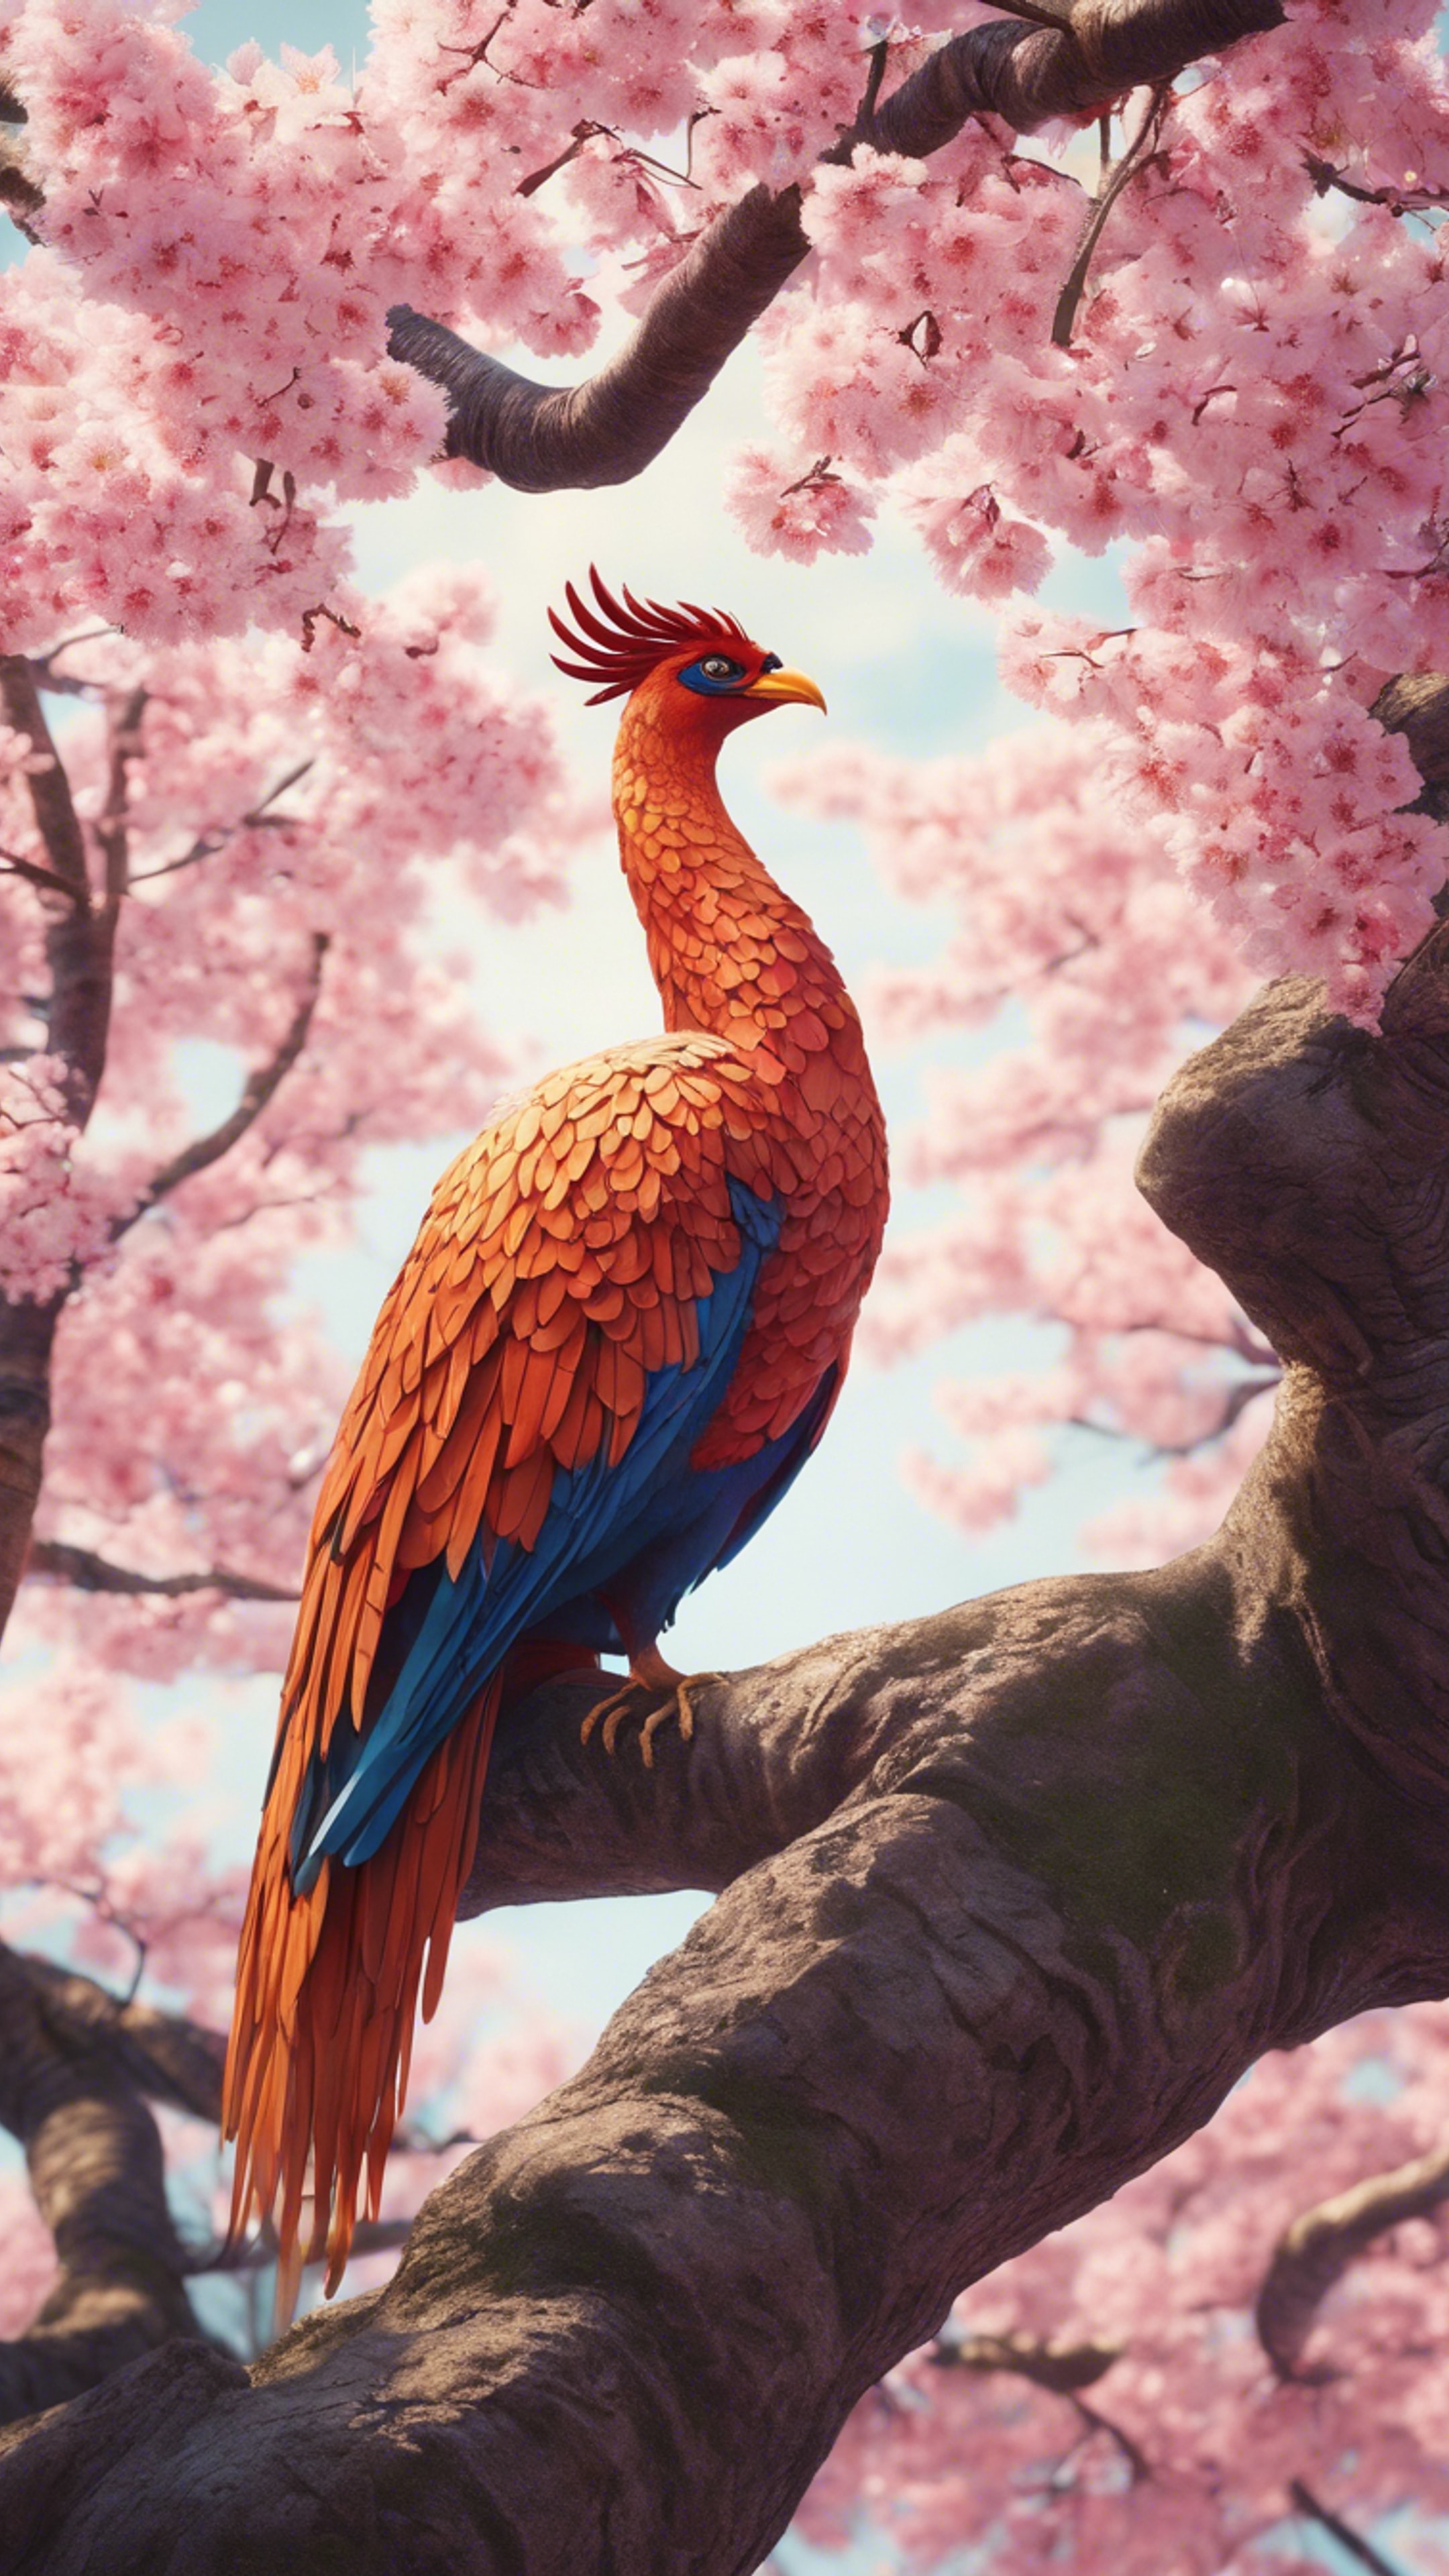 A mythical phoenix in a meditative stance, sitting under a vivid, blooming cherry blossom tree in Japan.壁紙[2dc82069e51c4c8b8140]